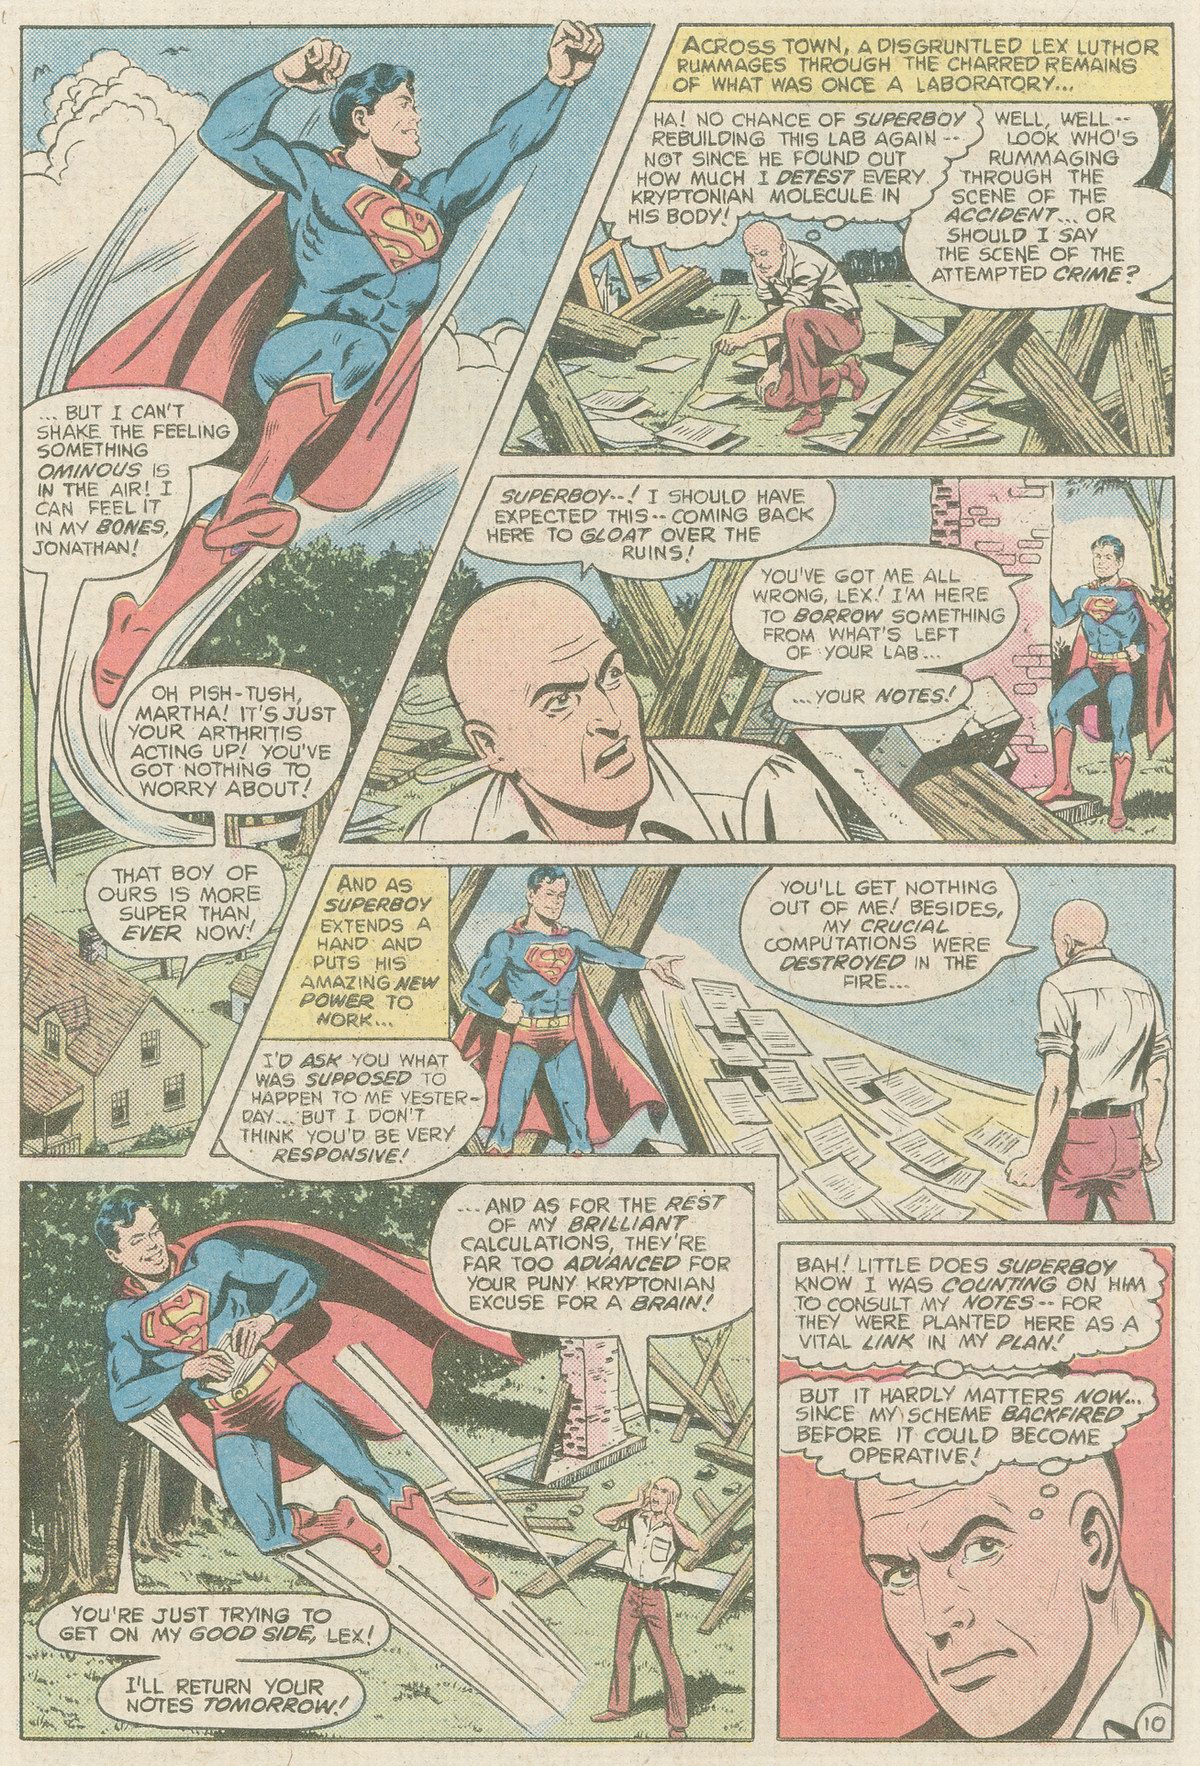 The New Adventures of Superboy 11 Page 10